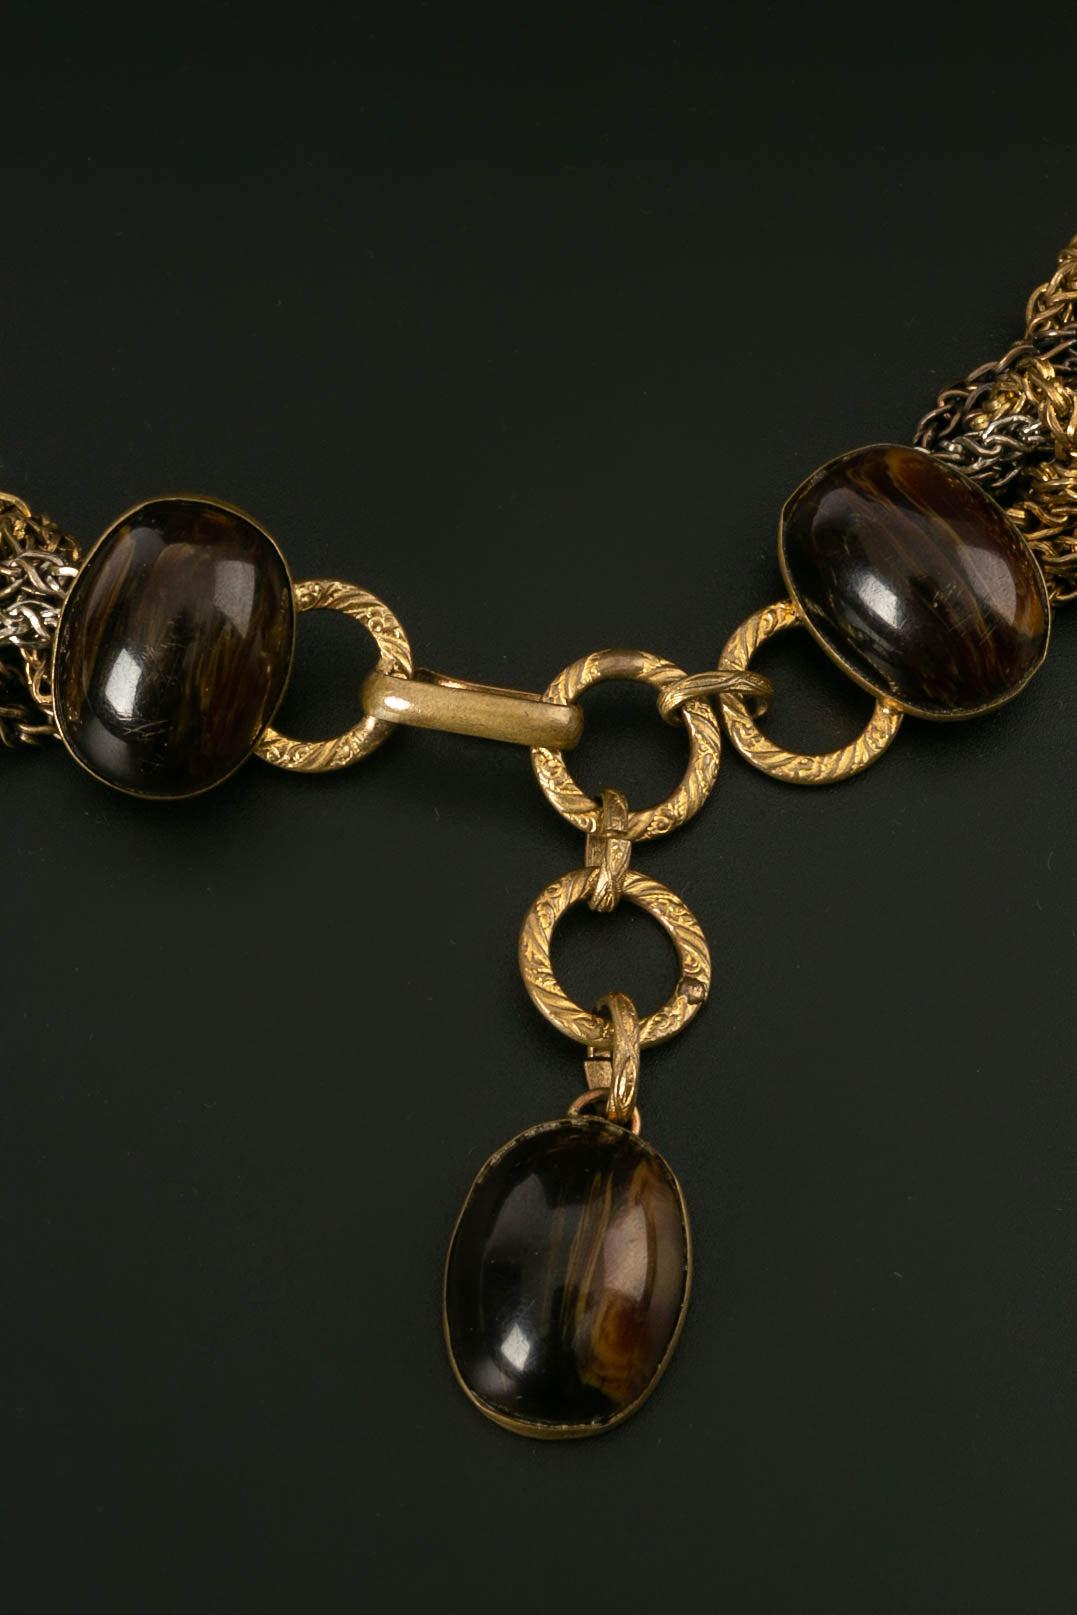 Yves Saint Laurent Intertwined Chains Belt, 1960s-1970 For Sale 3